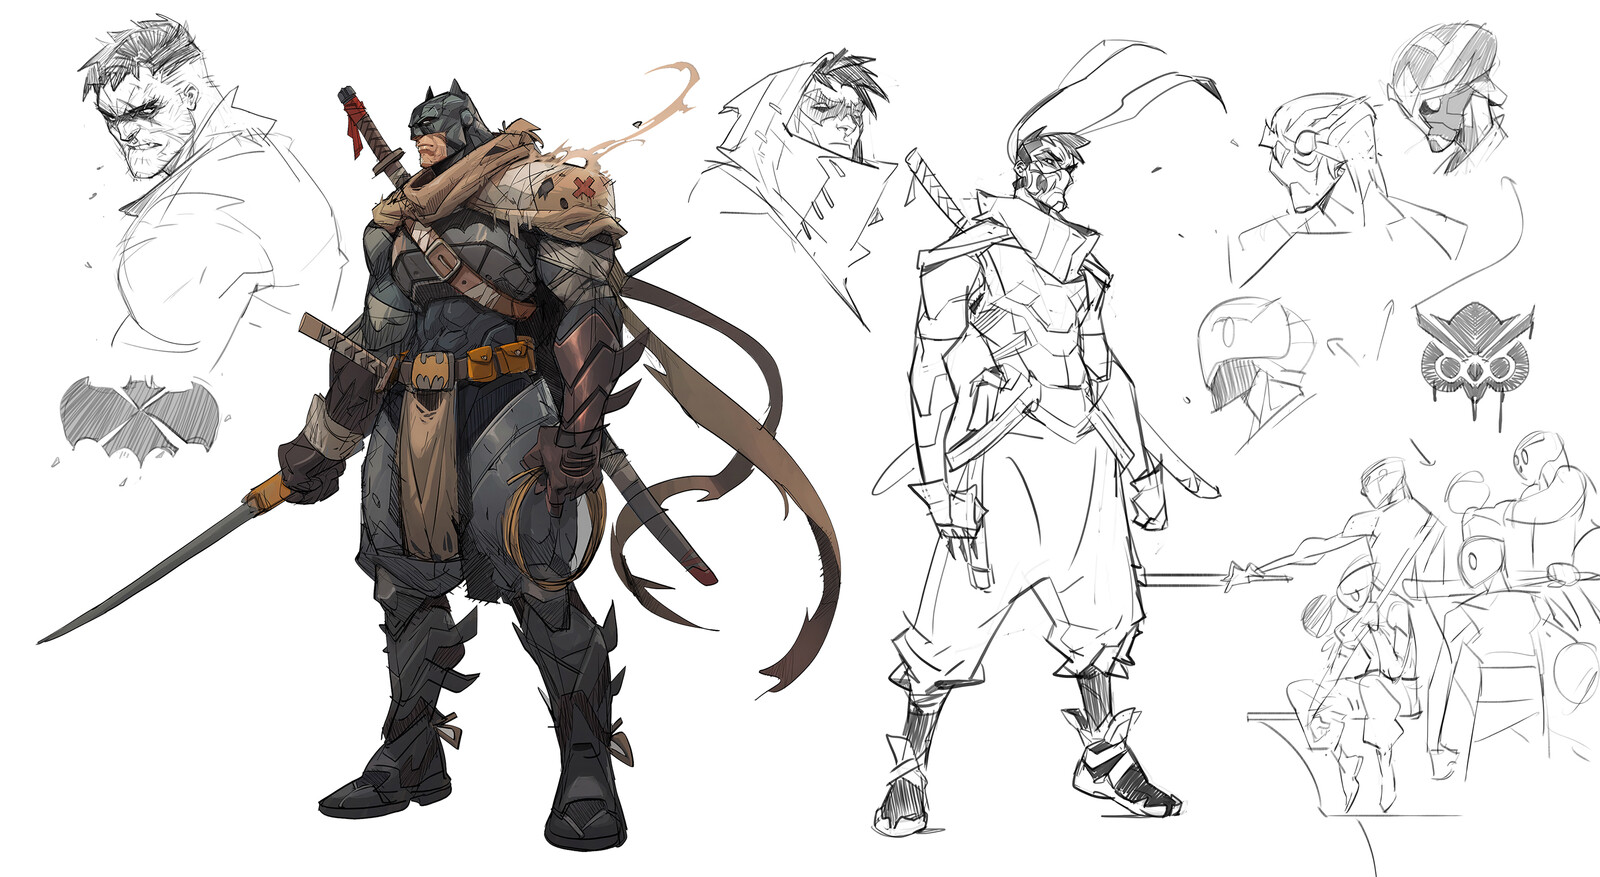 Batman V Concepts and other sketches!